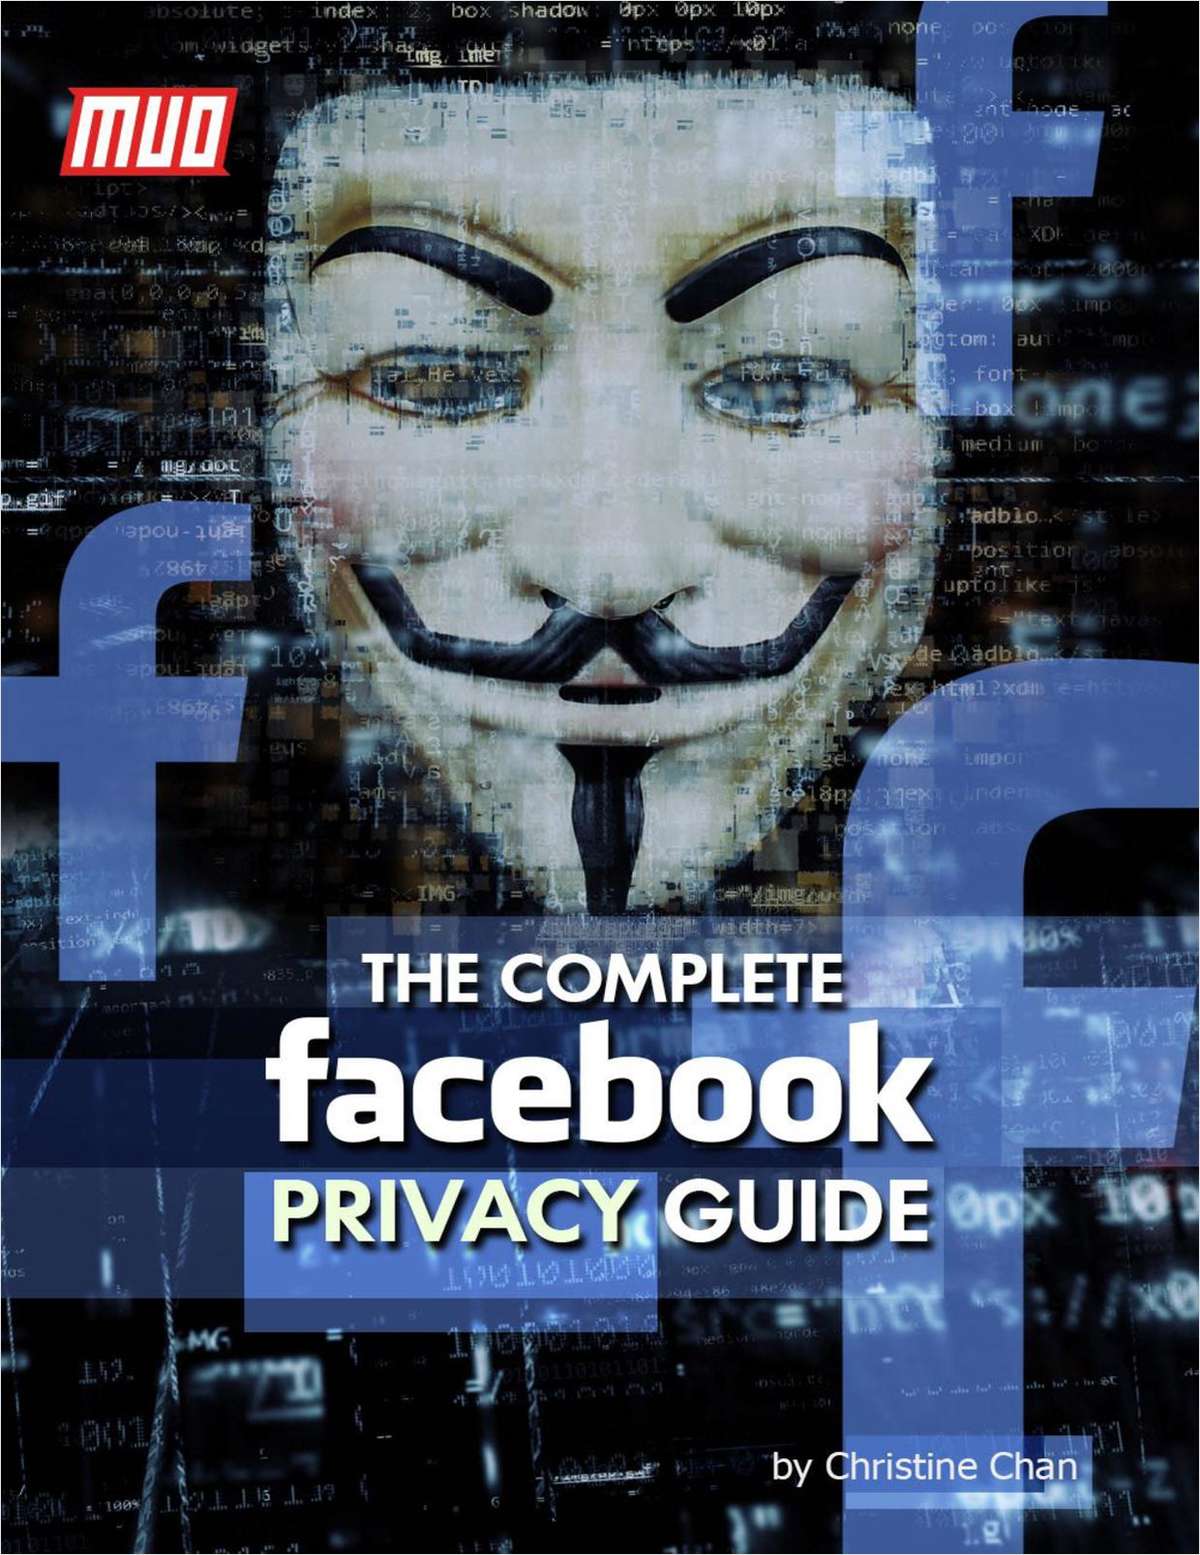 The Complete Facebook Privacy Guide